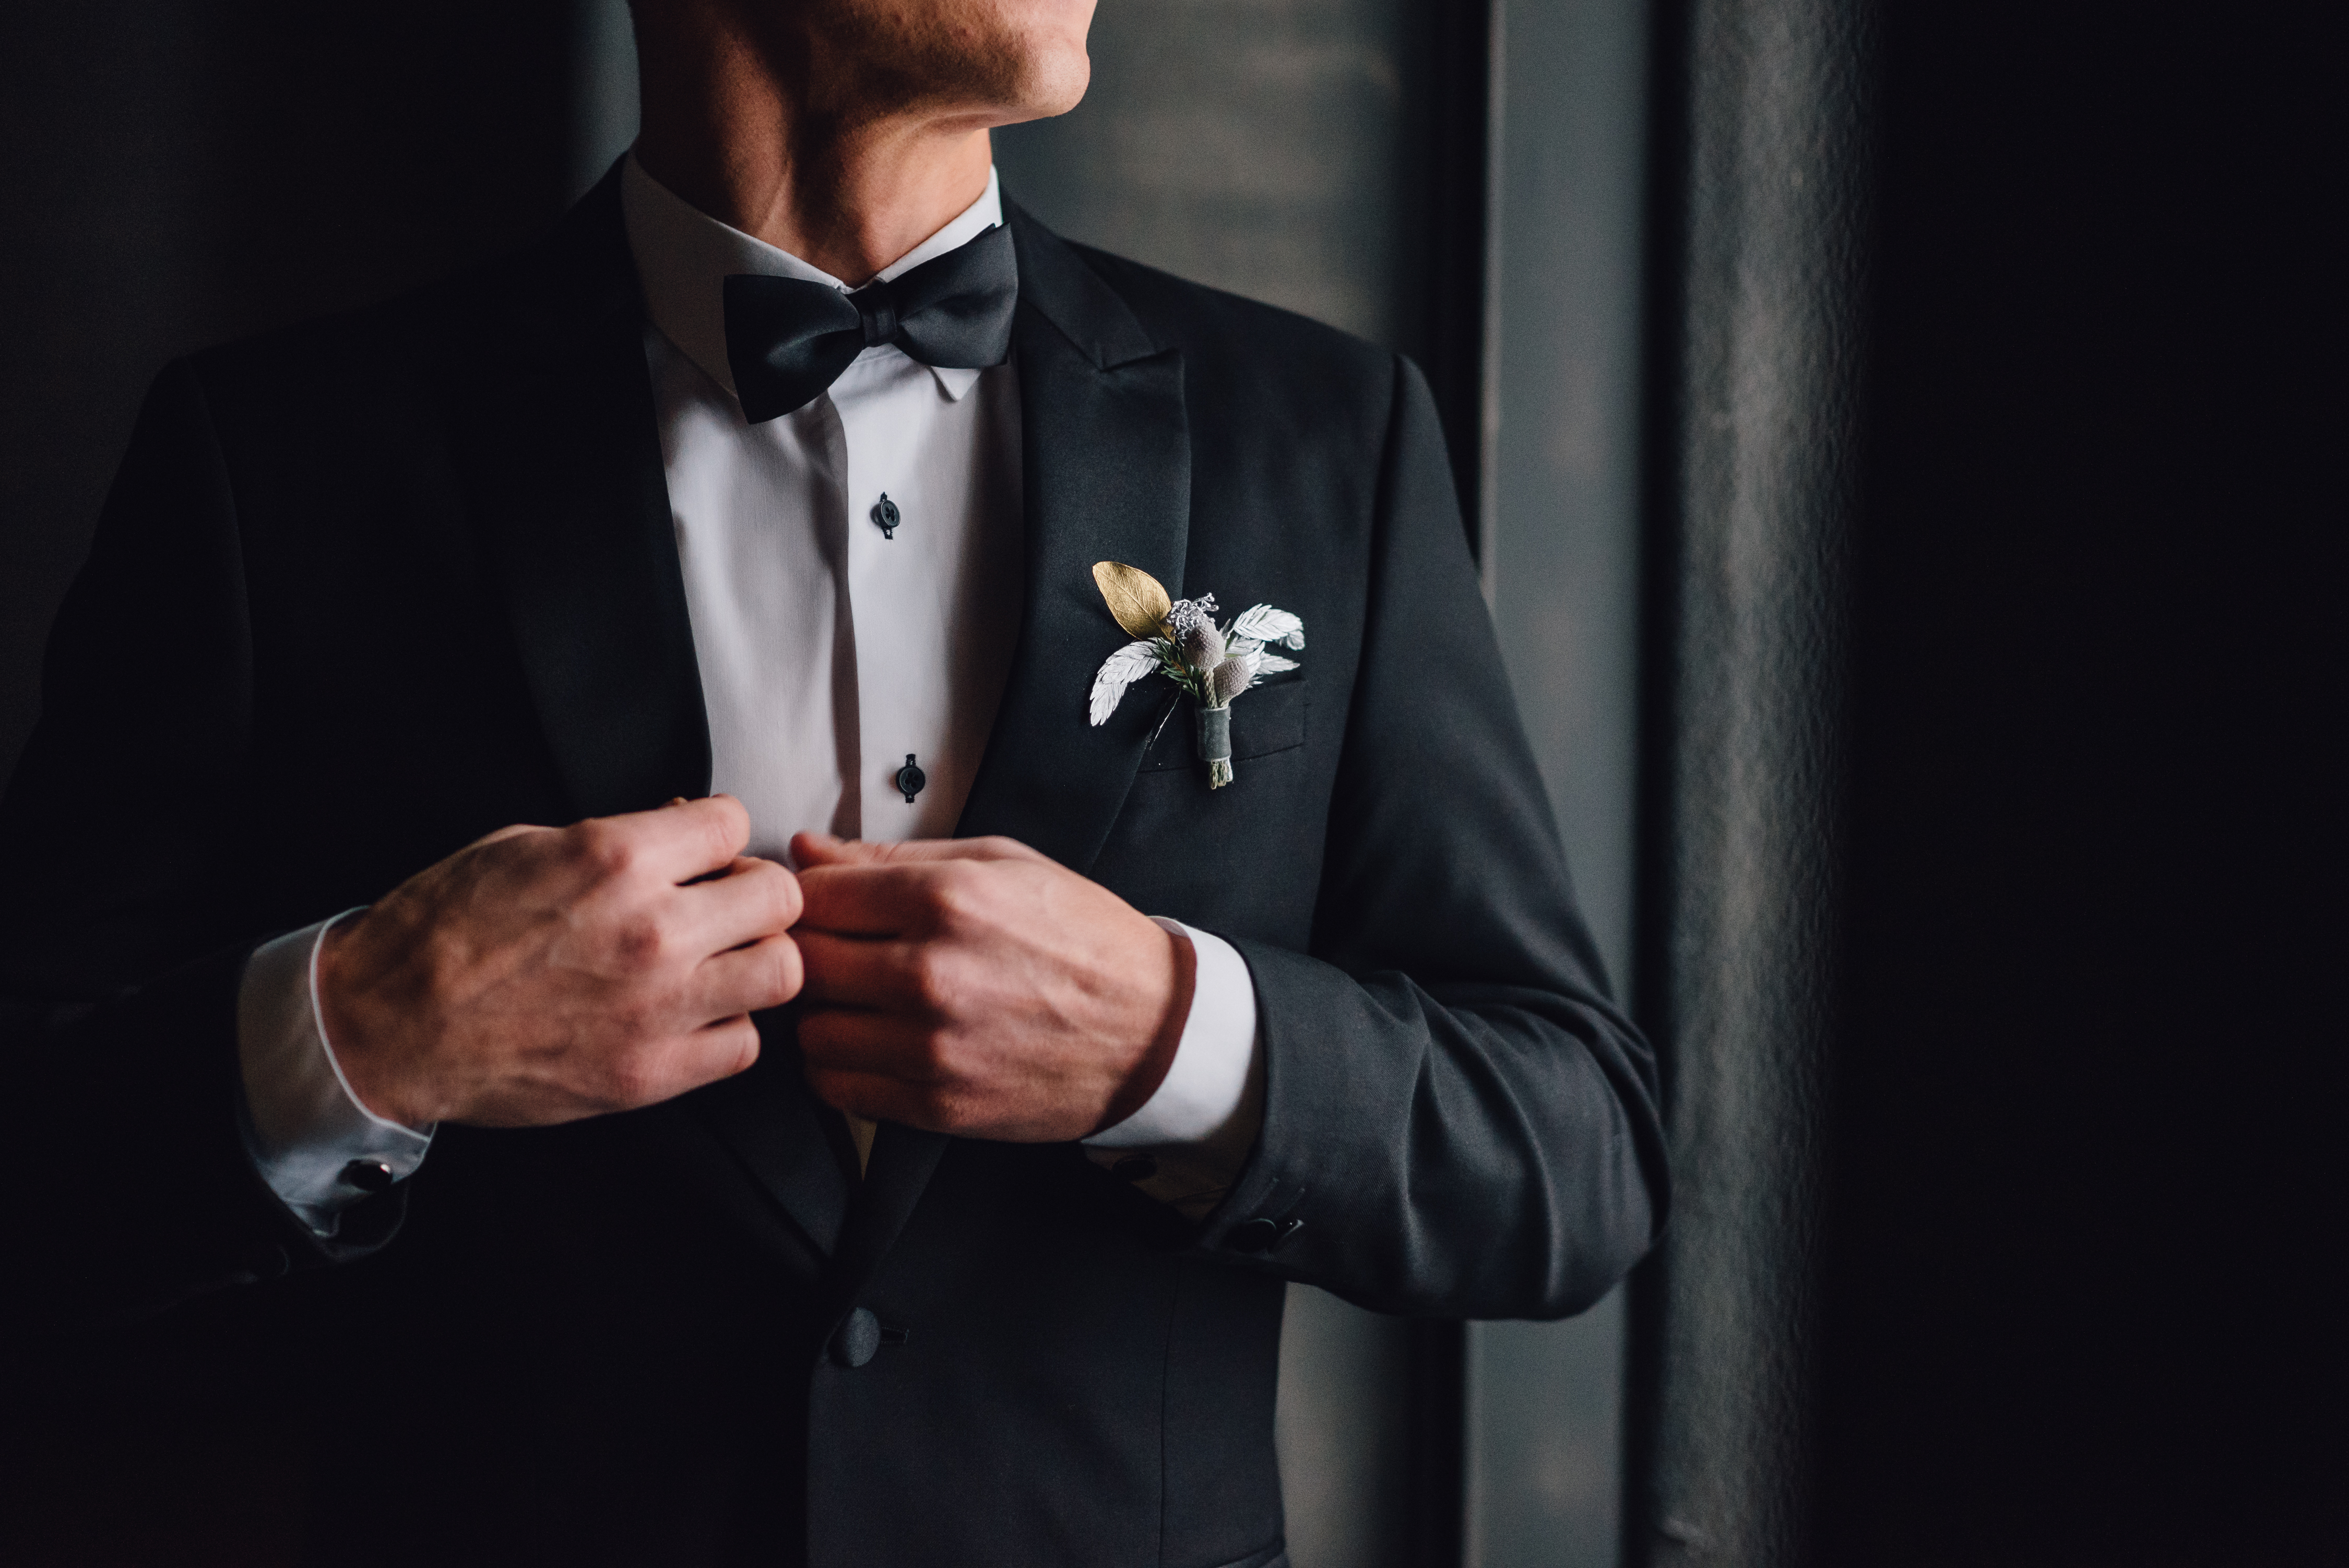 An image showing a groom getting ready on his wedding day | Source: Shutterstock